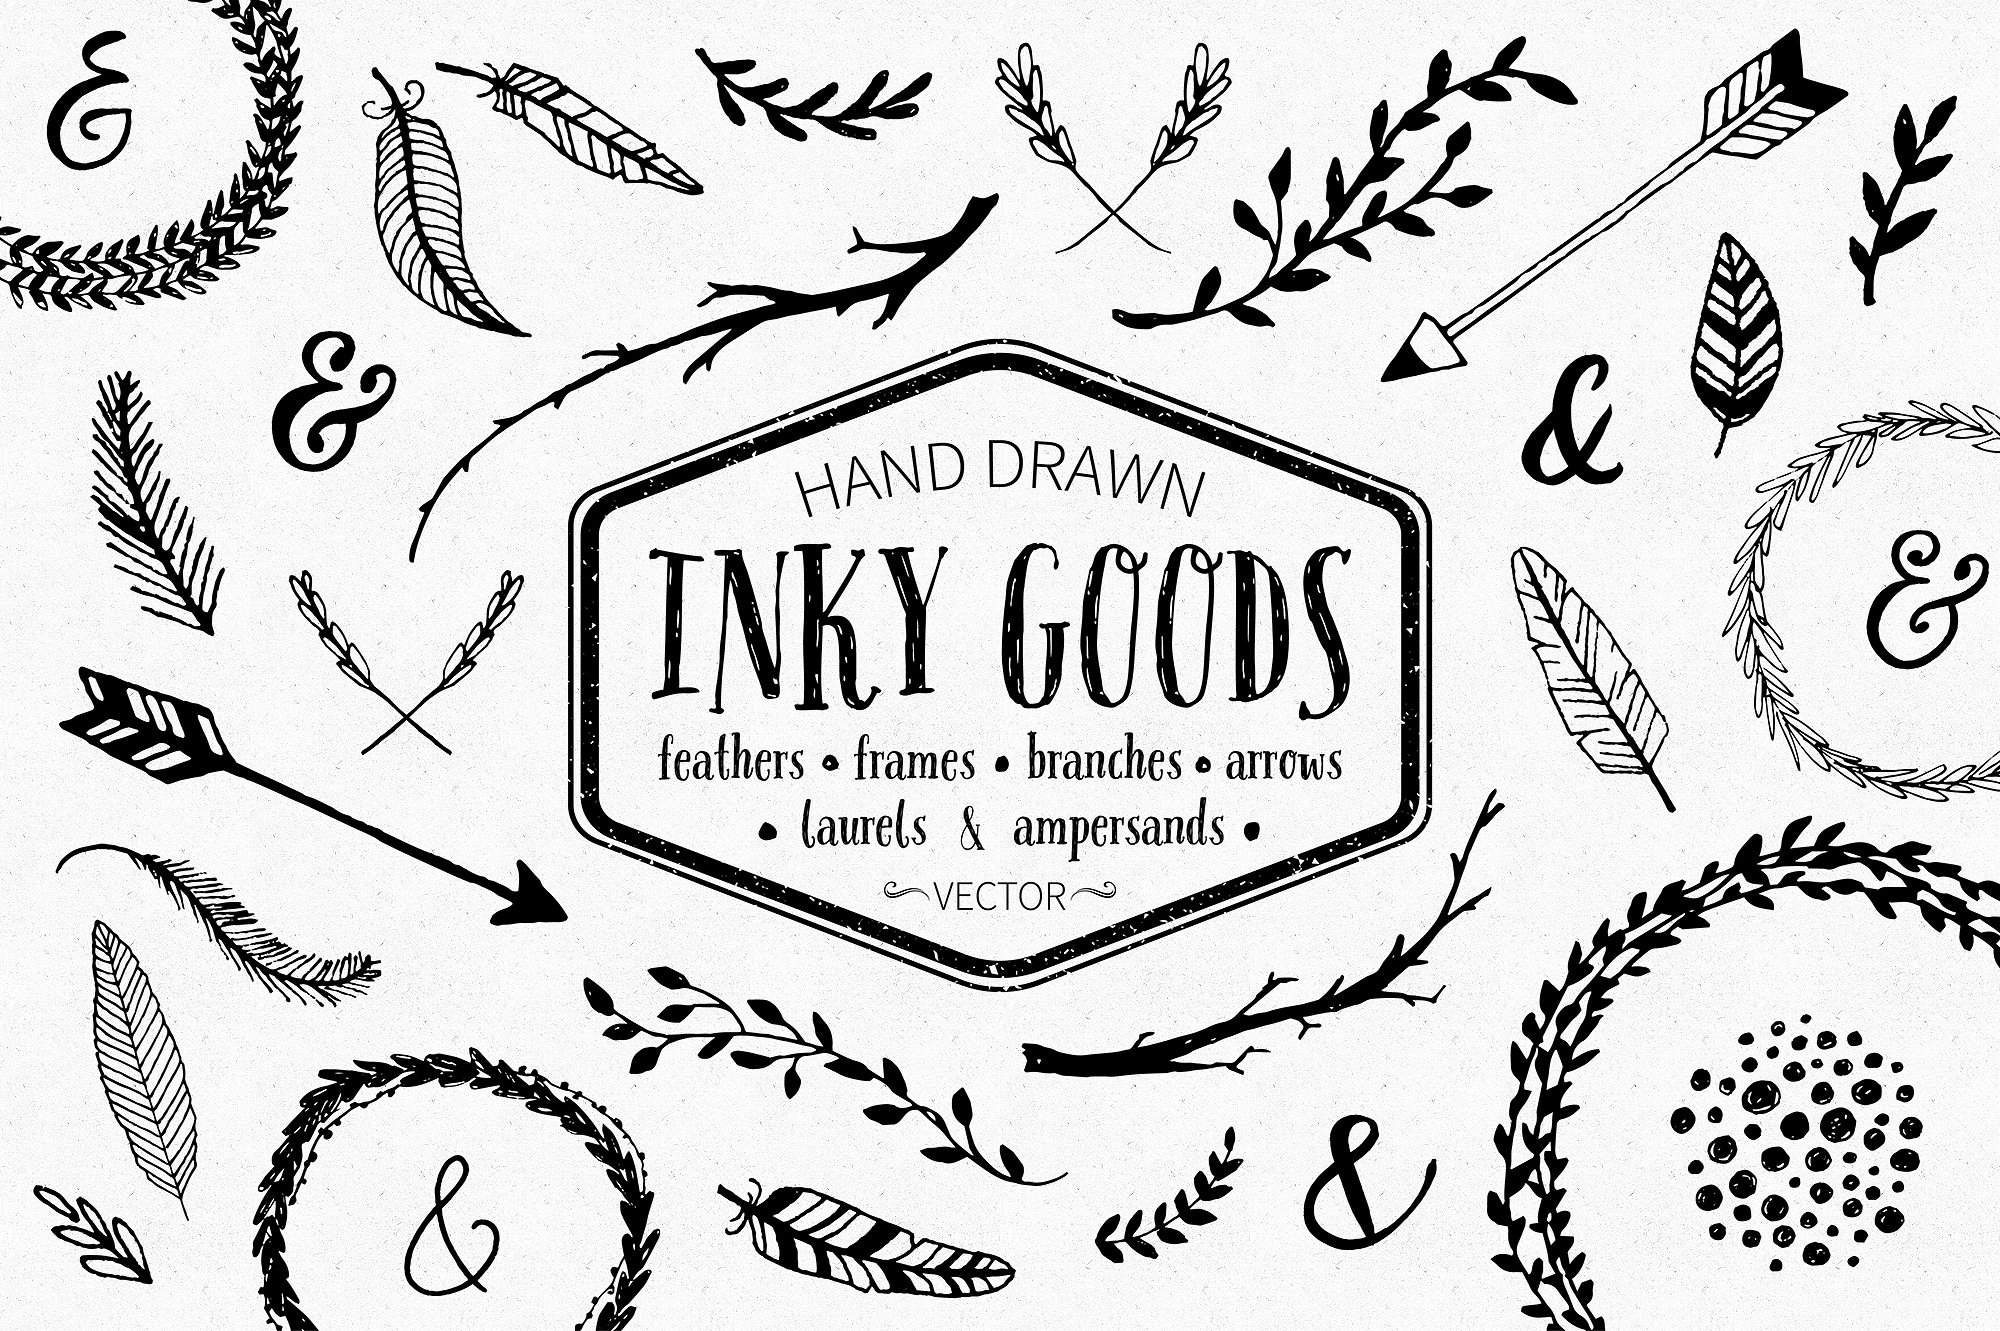 Inky矢量手绘图形 Inky Goods Vector Graphics插图